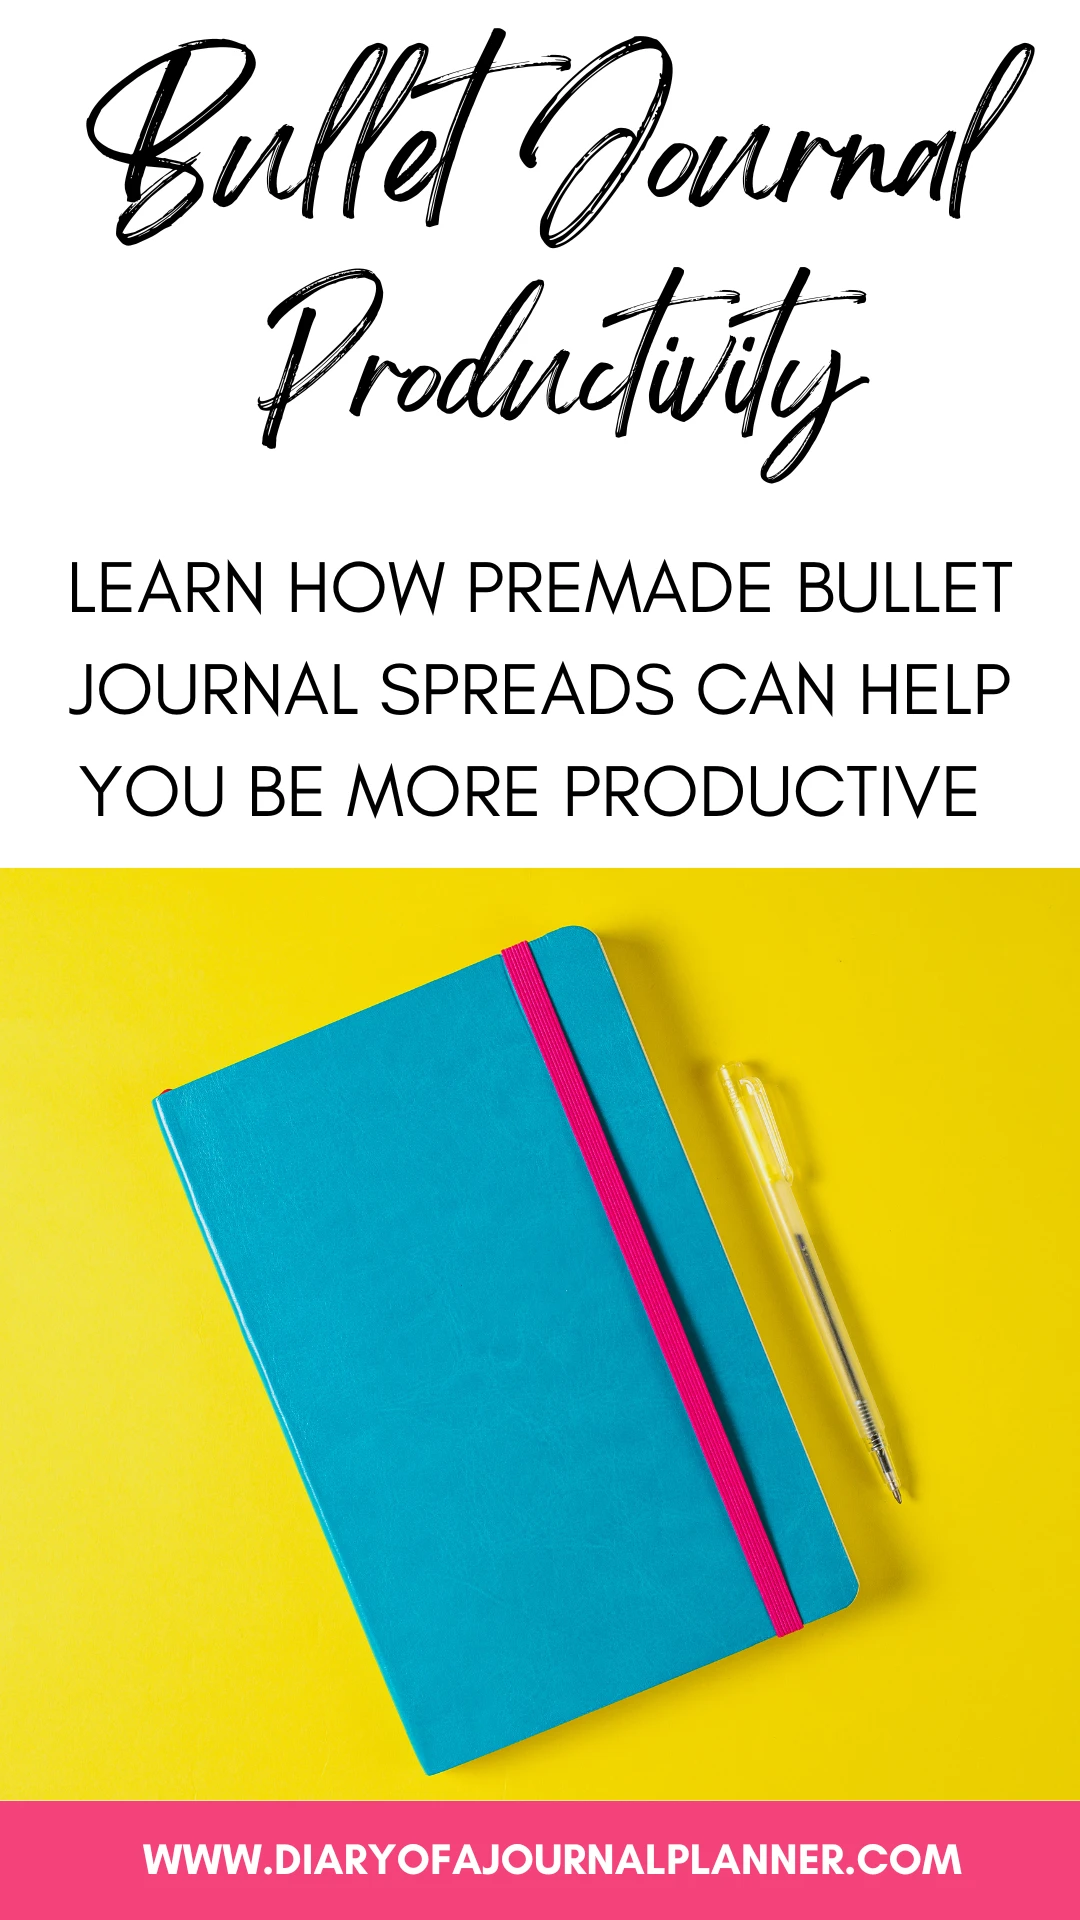 Why A Premade Bullet Journal Could Save You Time, Effort and Money!